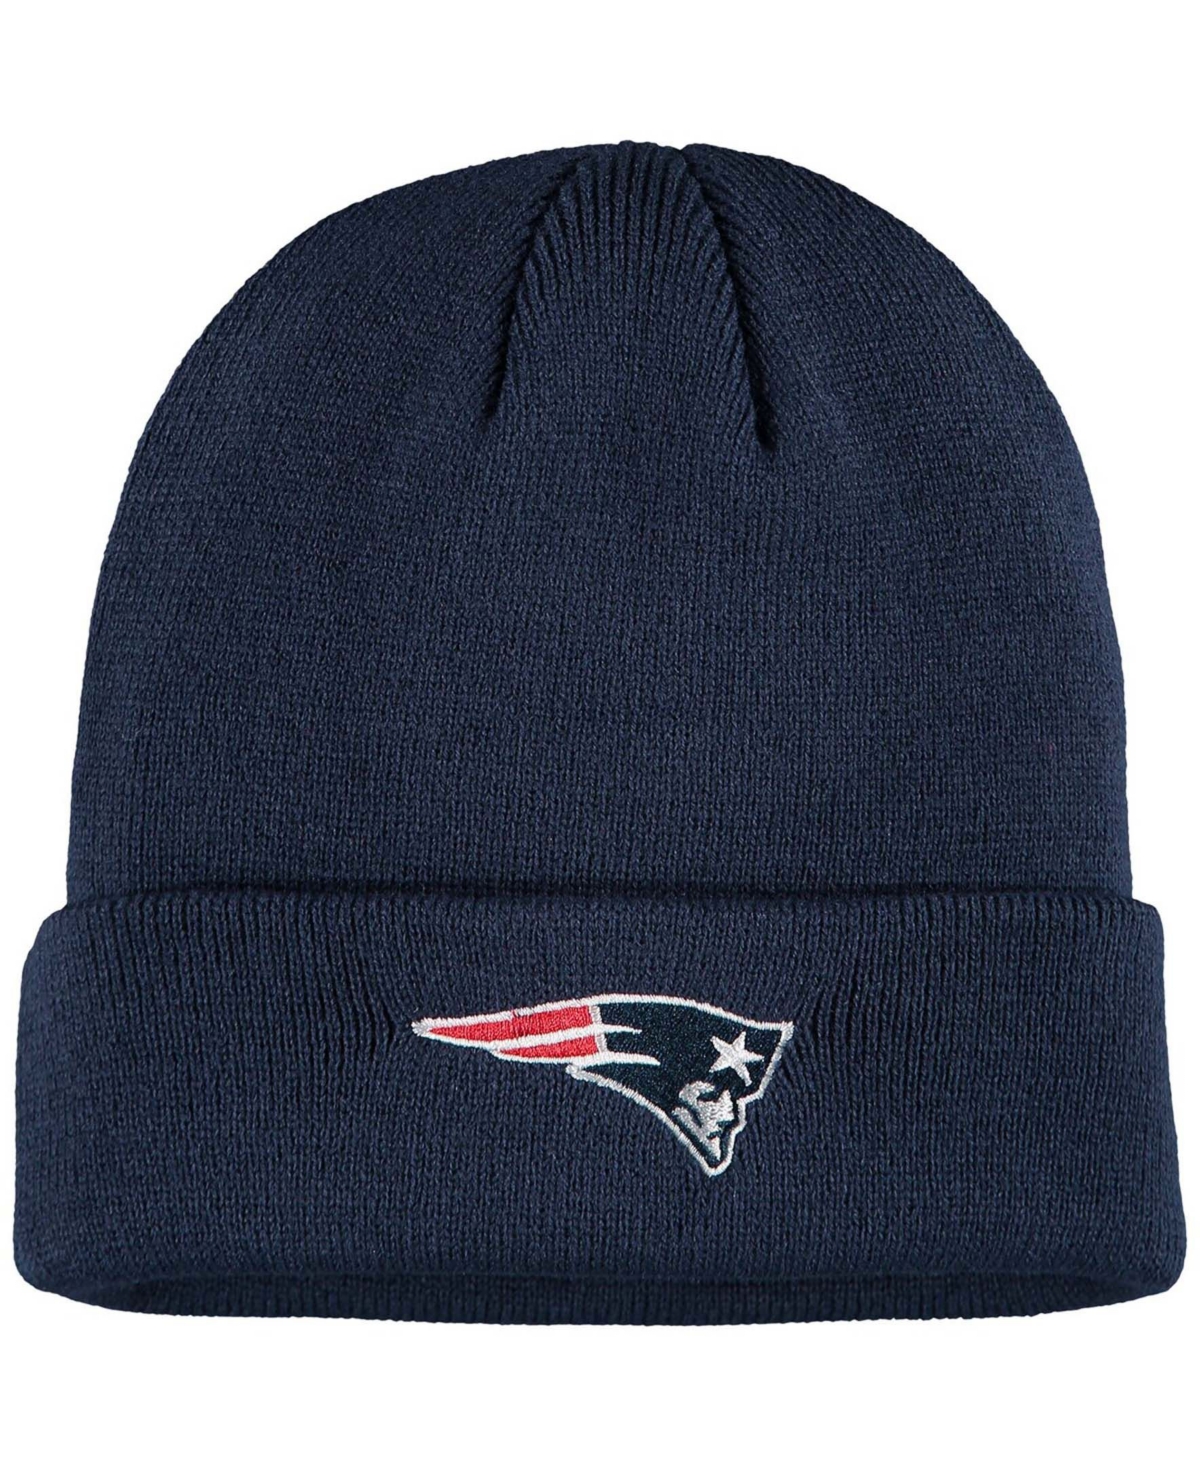 Shop Outerstuff Big Boys And Girls Navy New England Patriots Basic Cuffed Knit Hat